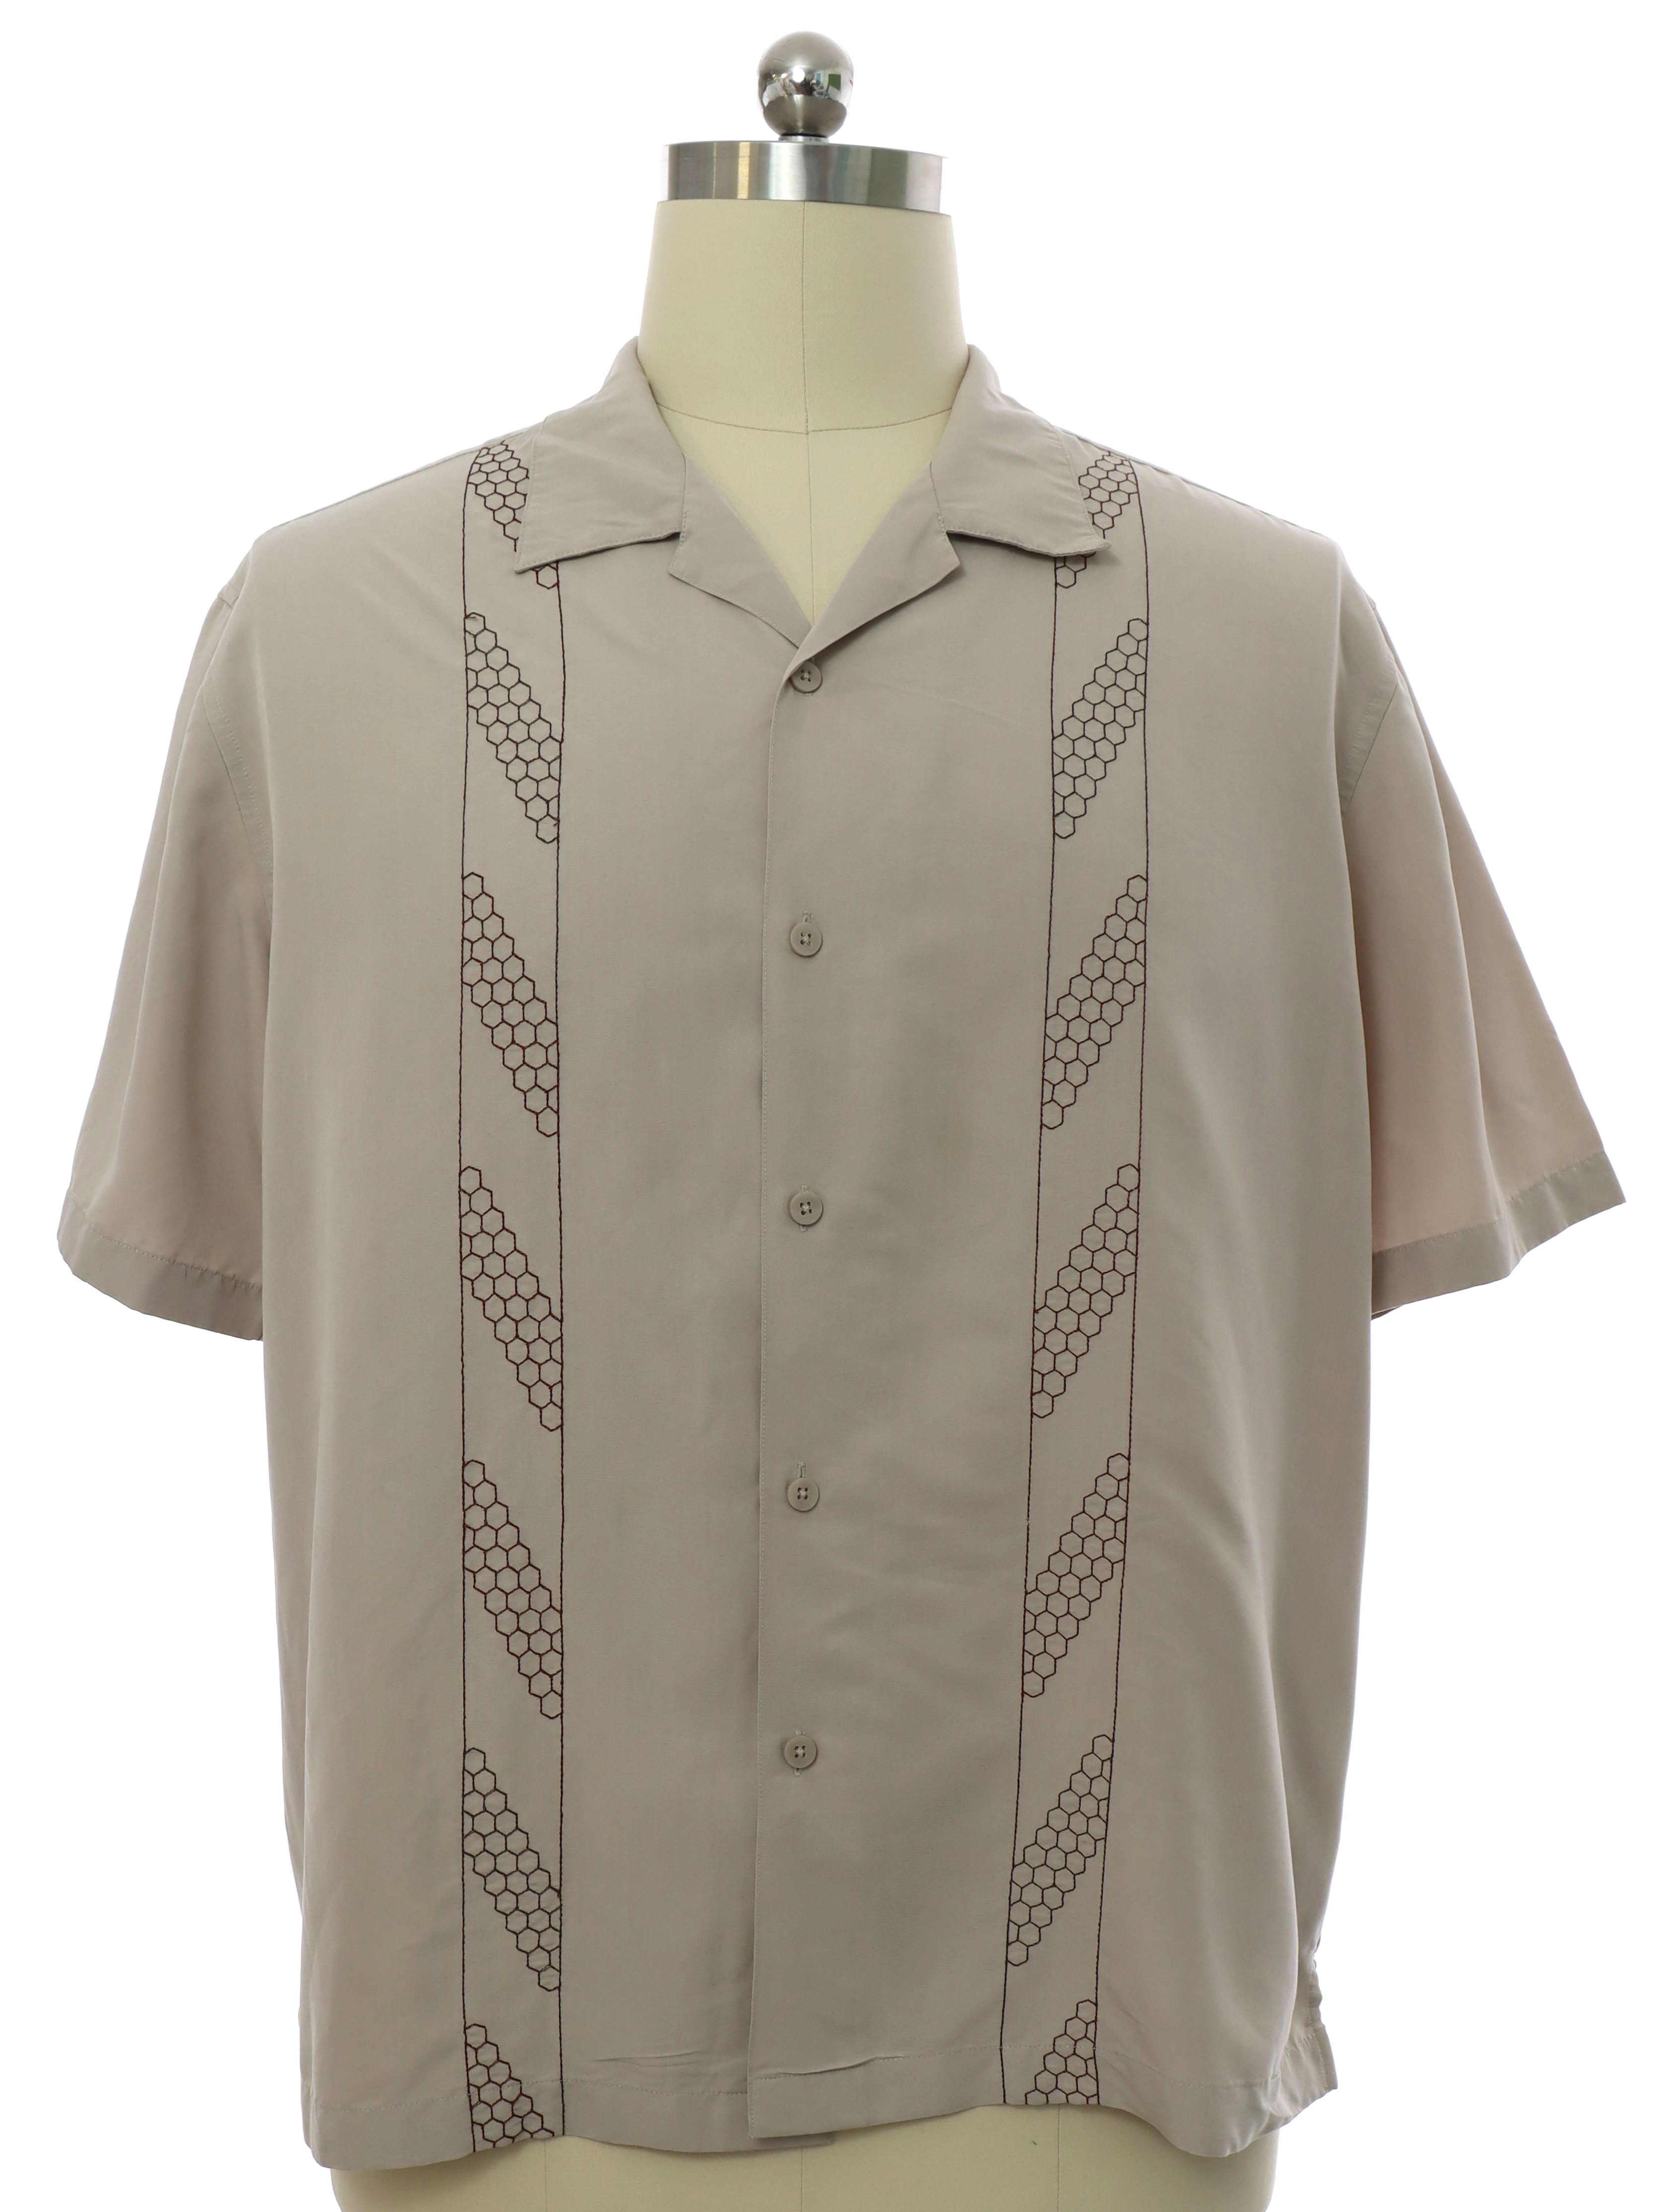 Shirt: 90s -The Havanera Co.- Mens tan background rayon polyester blend ...